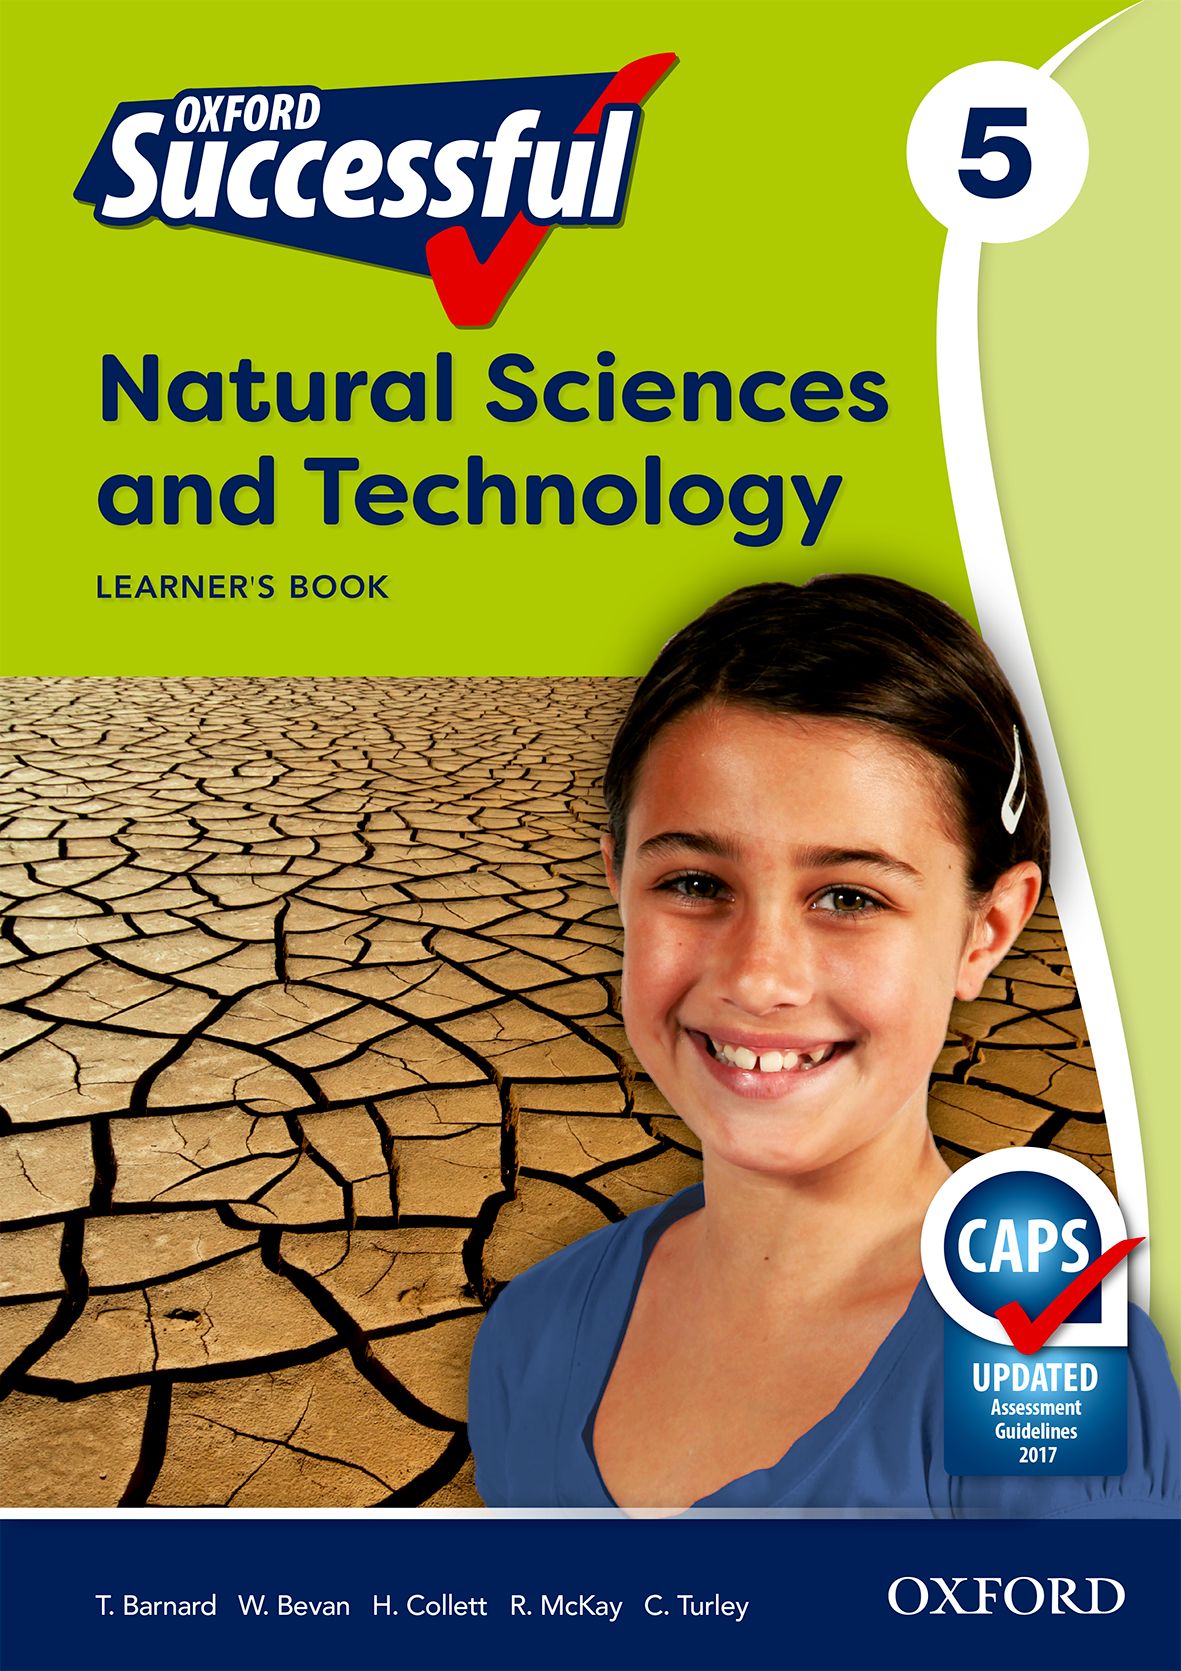 Oxford Successful Natural Sciences and Technology Grade 5 Learner's Book (CAPS)